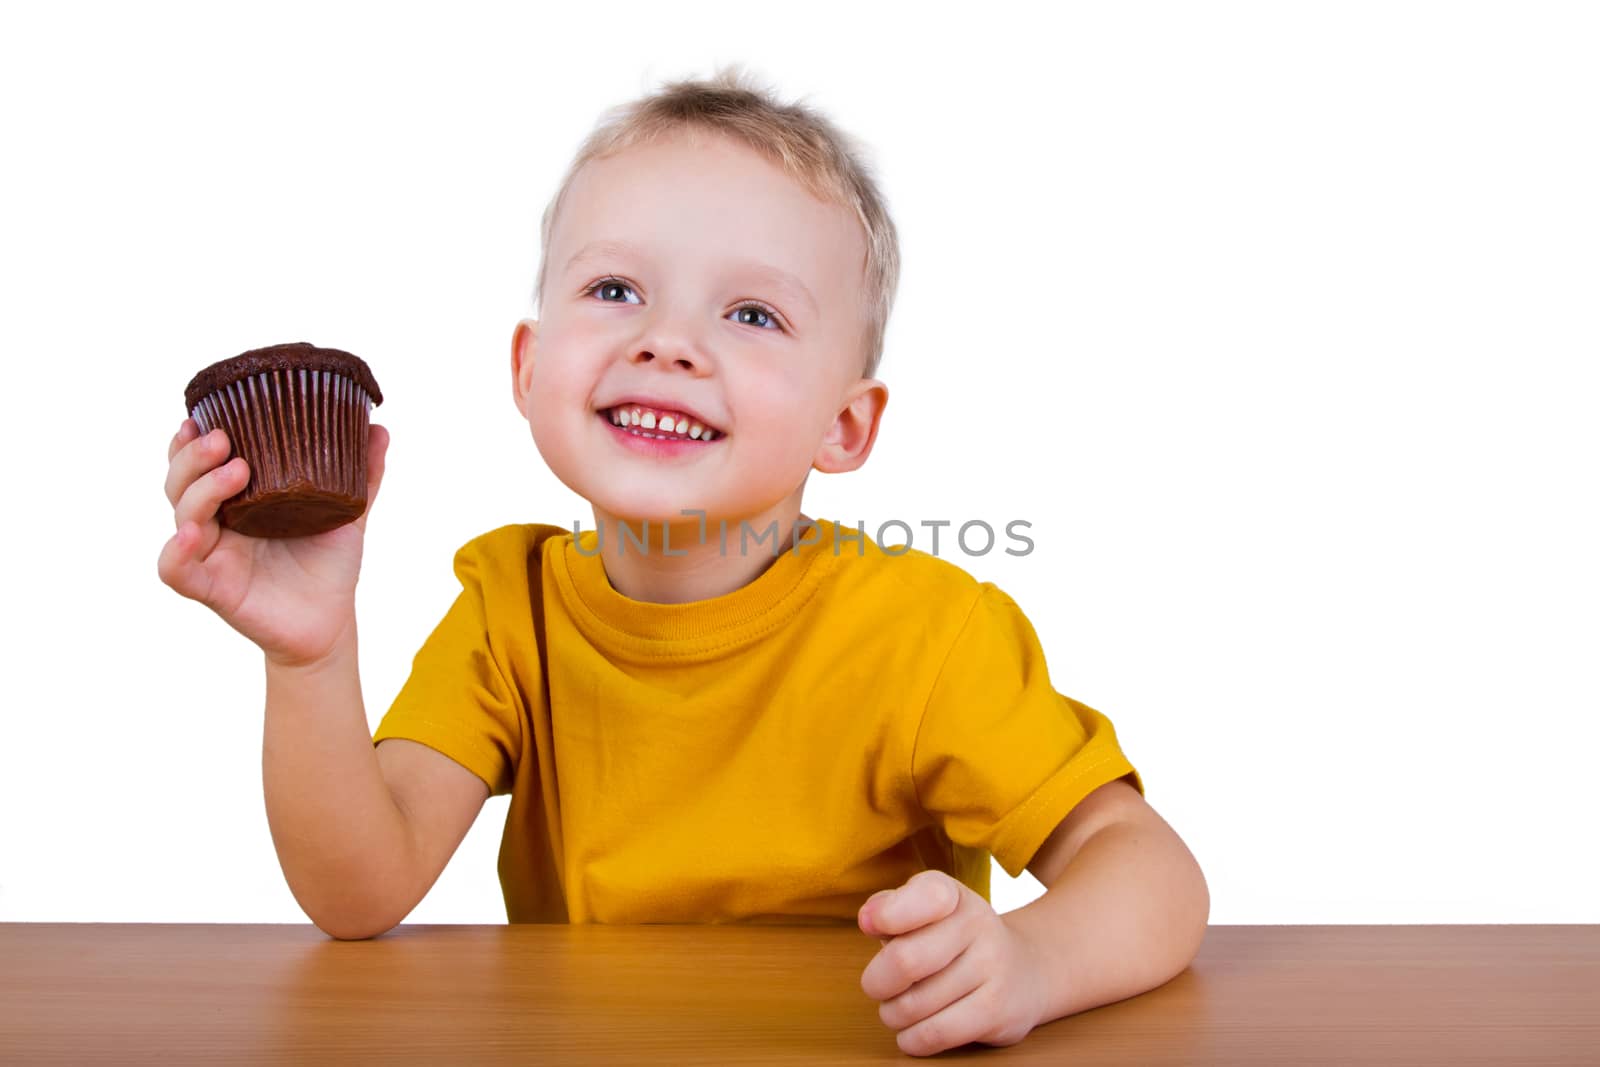 Small boy eating a chocolate muffin by grigorenko